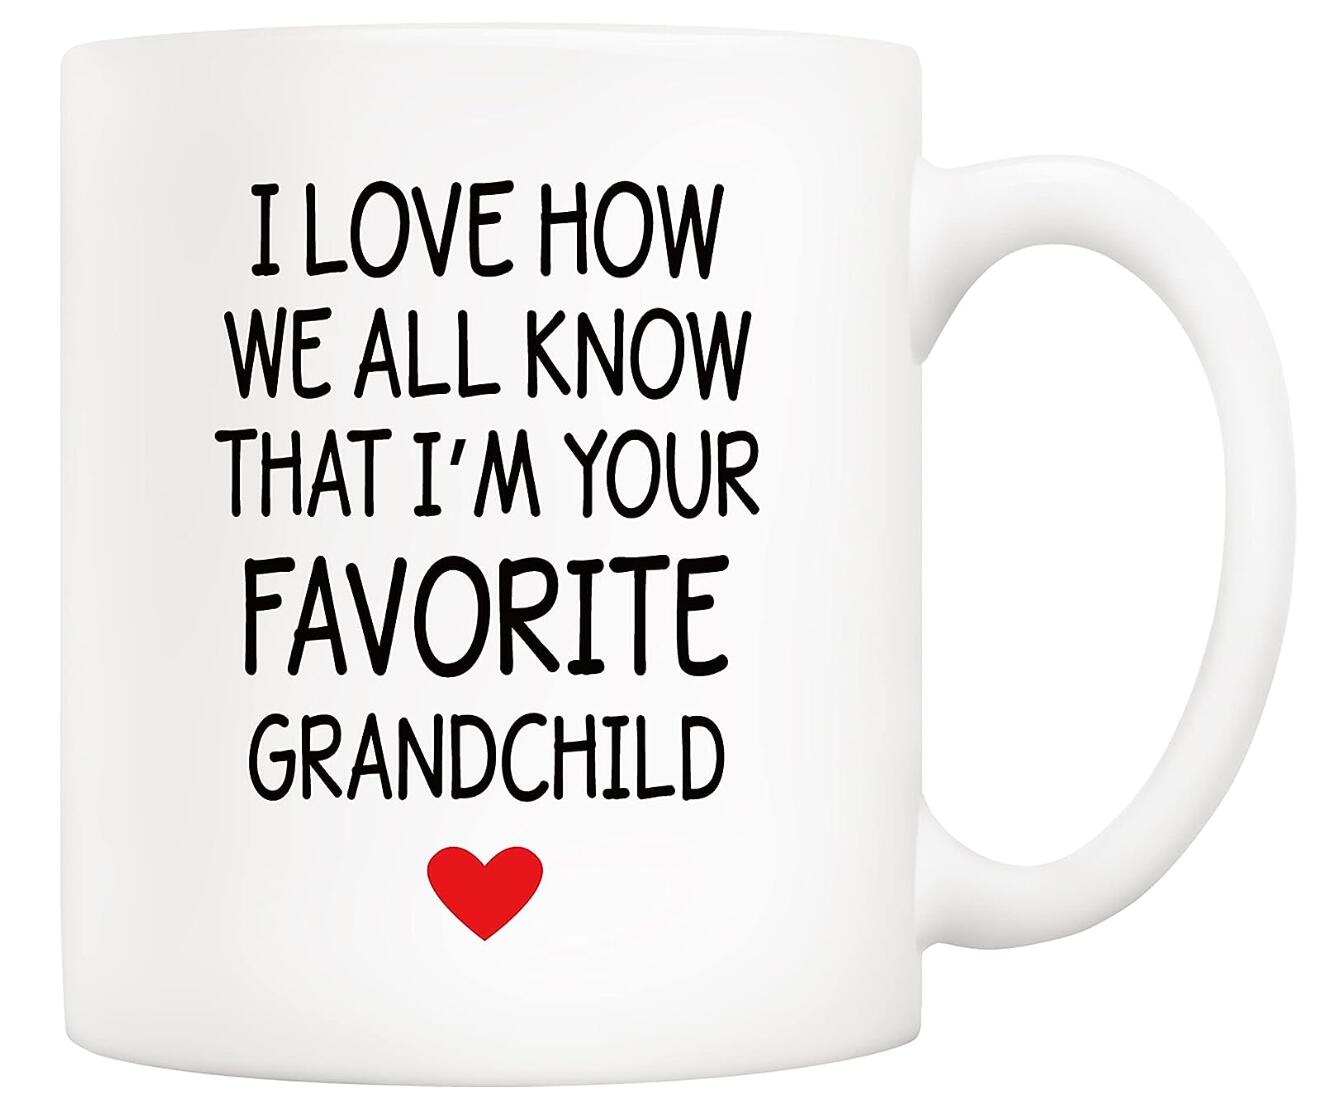 I Love How We All Know That I'm Your Favorite Grandchild Coffee Cup Mother's Day & Father's Day Gift Cup